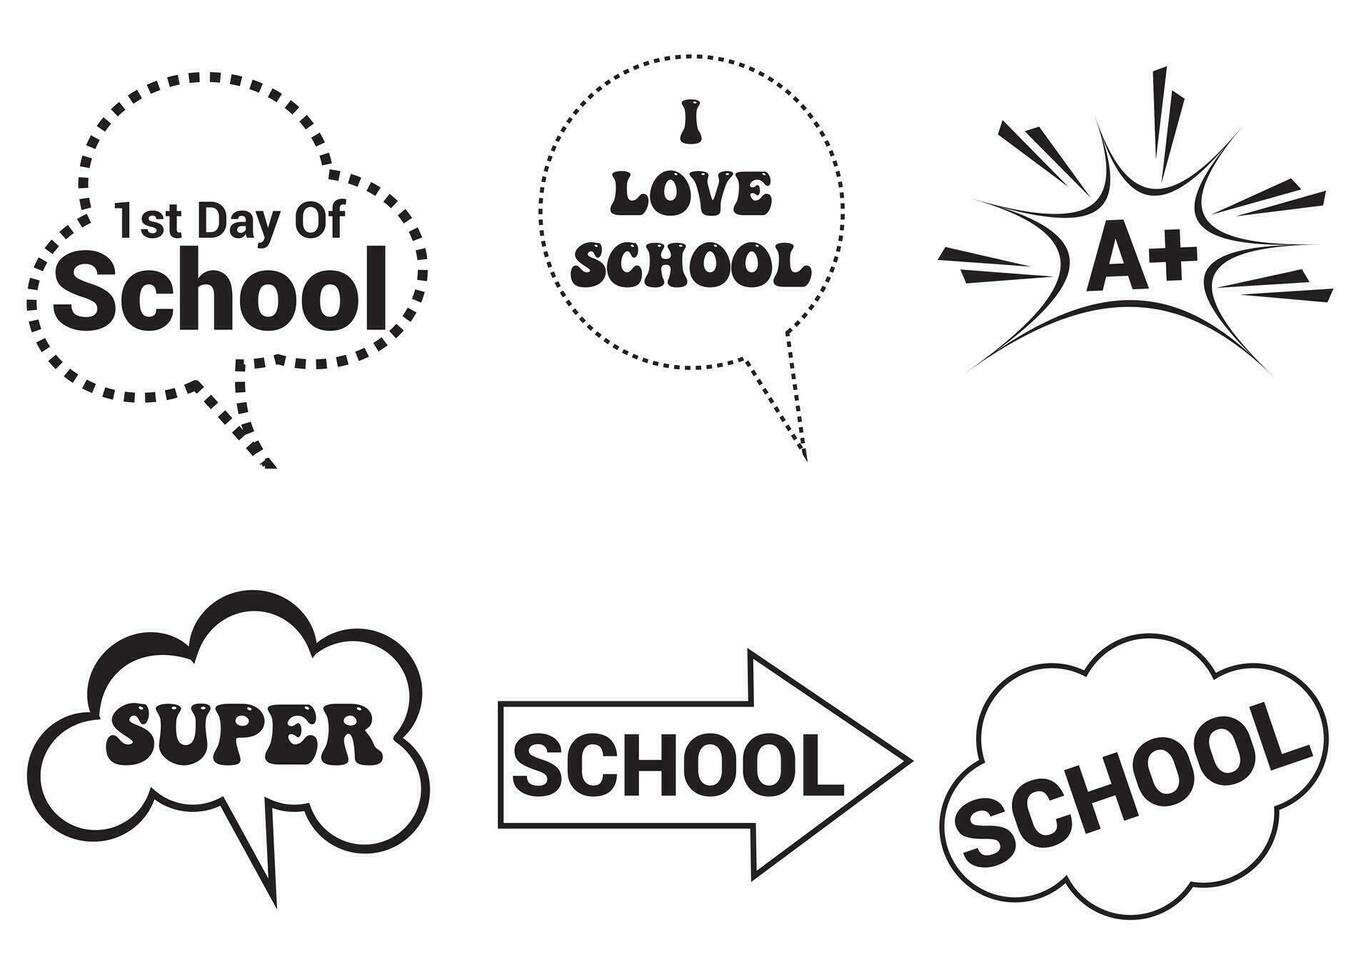 Lettering back school, go, goal, football, super, hey. Set comics book balloon. Bubble speech phrase. Cartoon exclusive font label tag expression. Comic text sound effects. vector